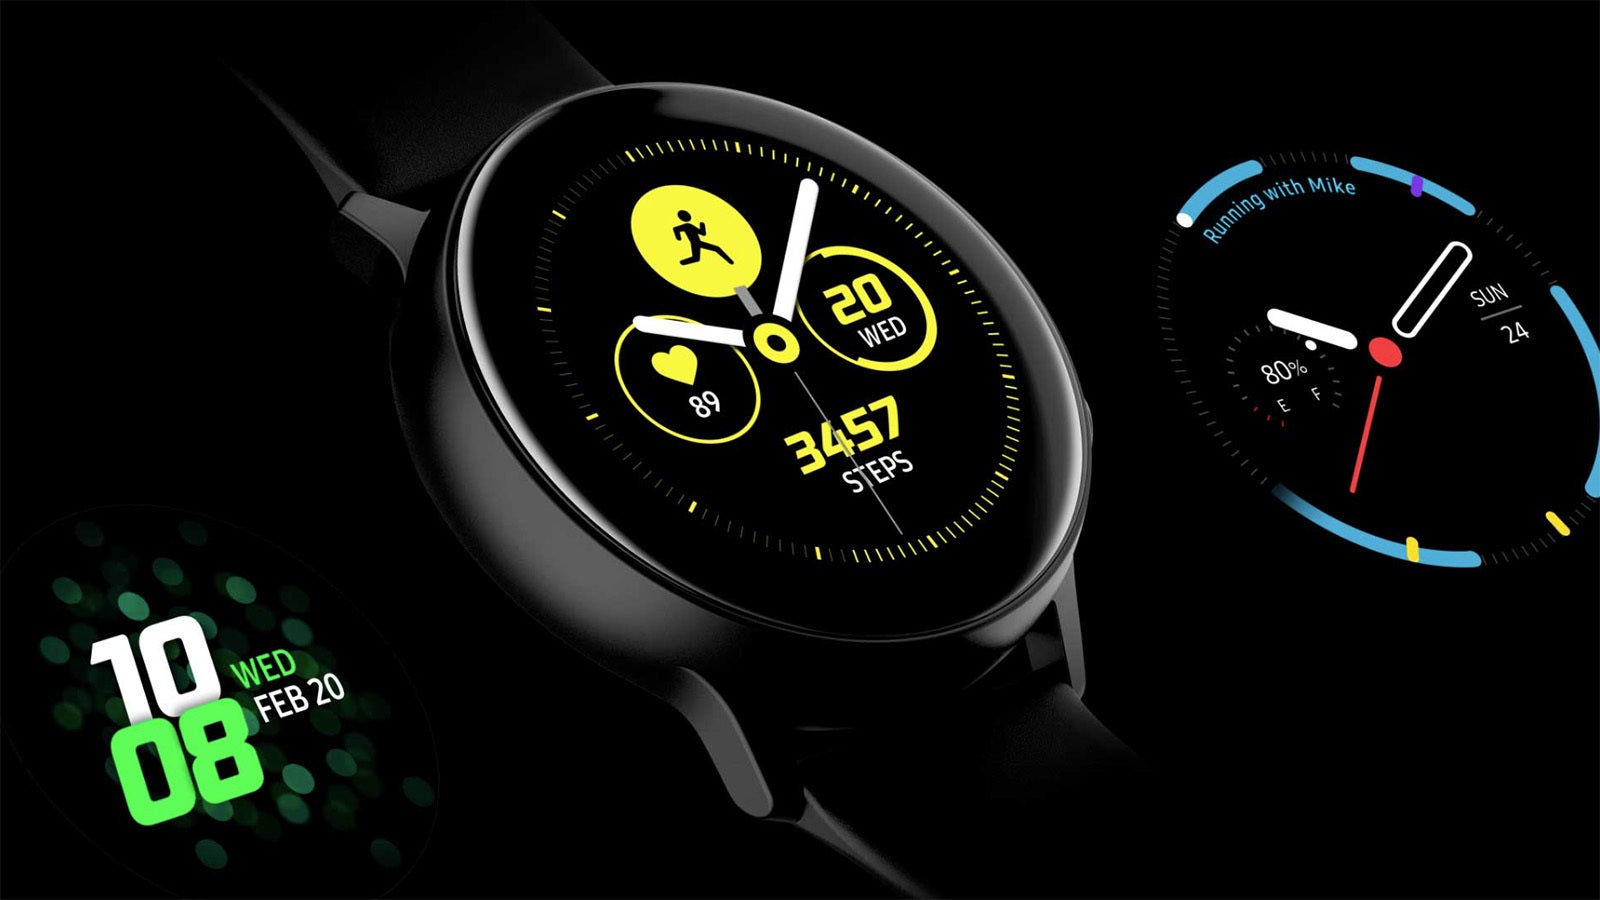 The Samsung Galaxy Watch Active also has a few innovative watchface designs. How many innovative smartphone lockscreen designs have you seen lately? - We need a better smartphone lockscreen experience